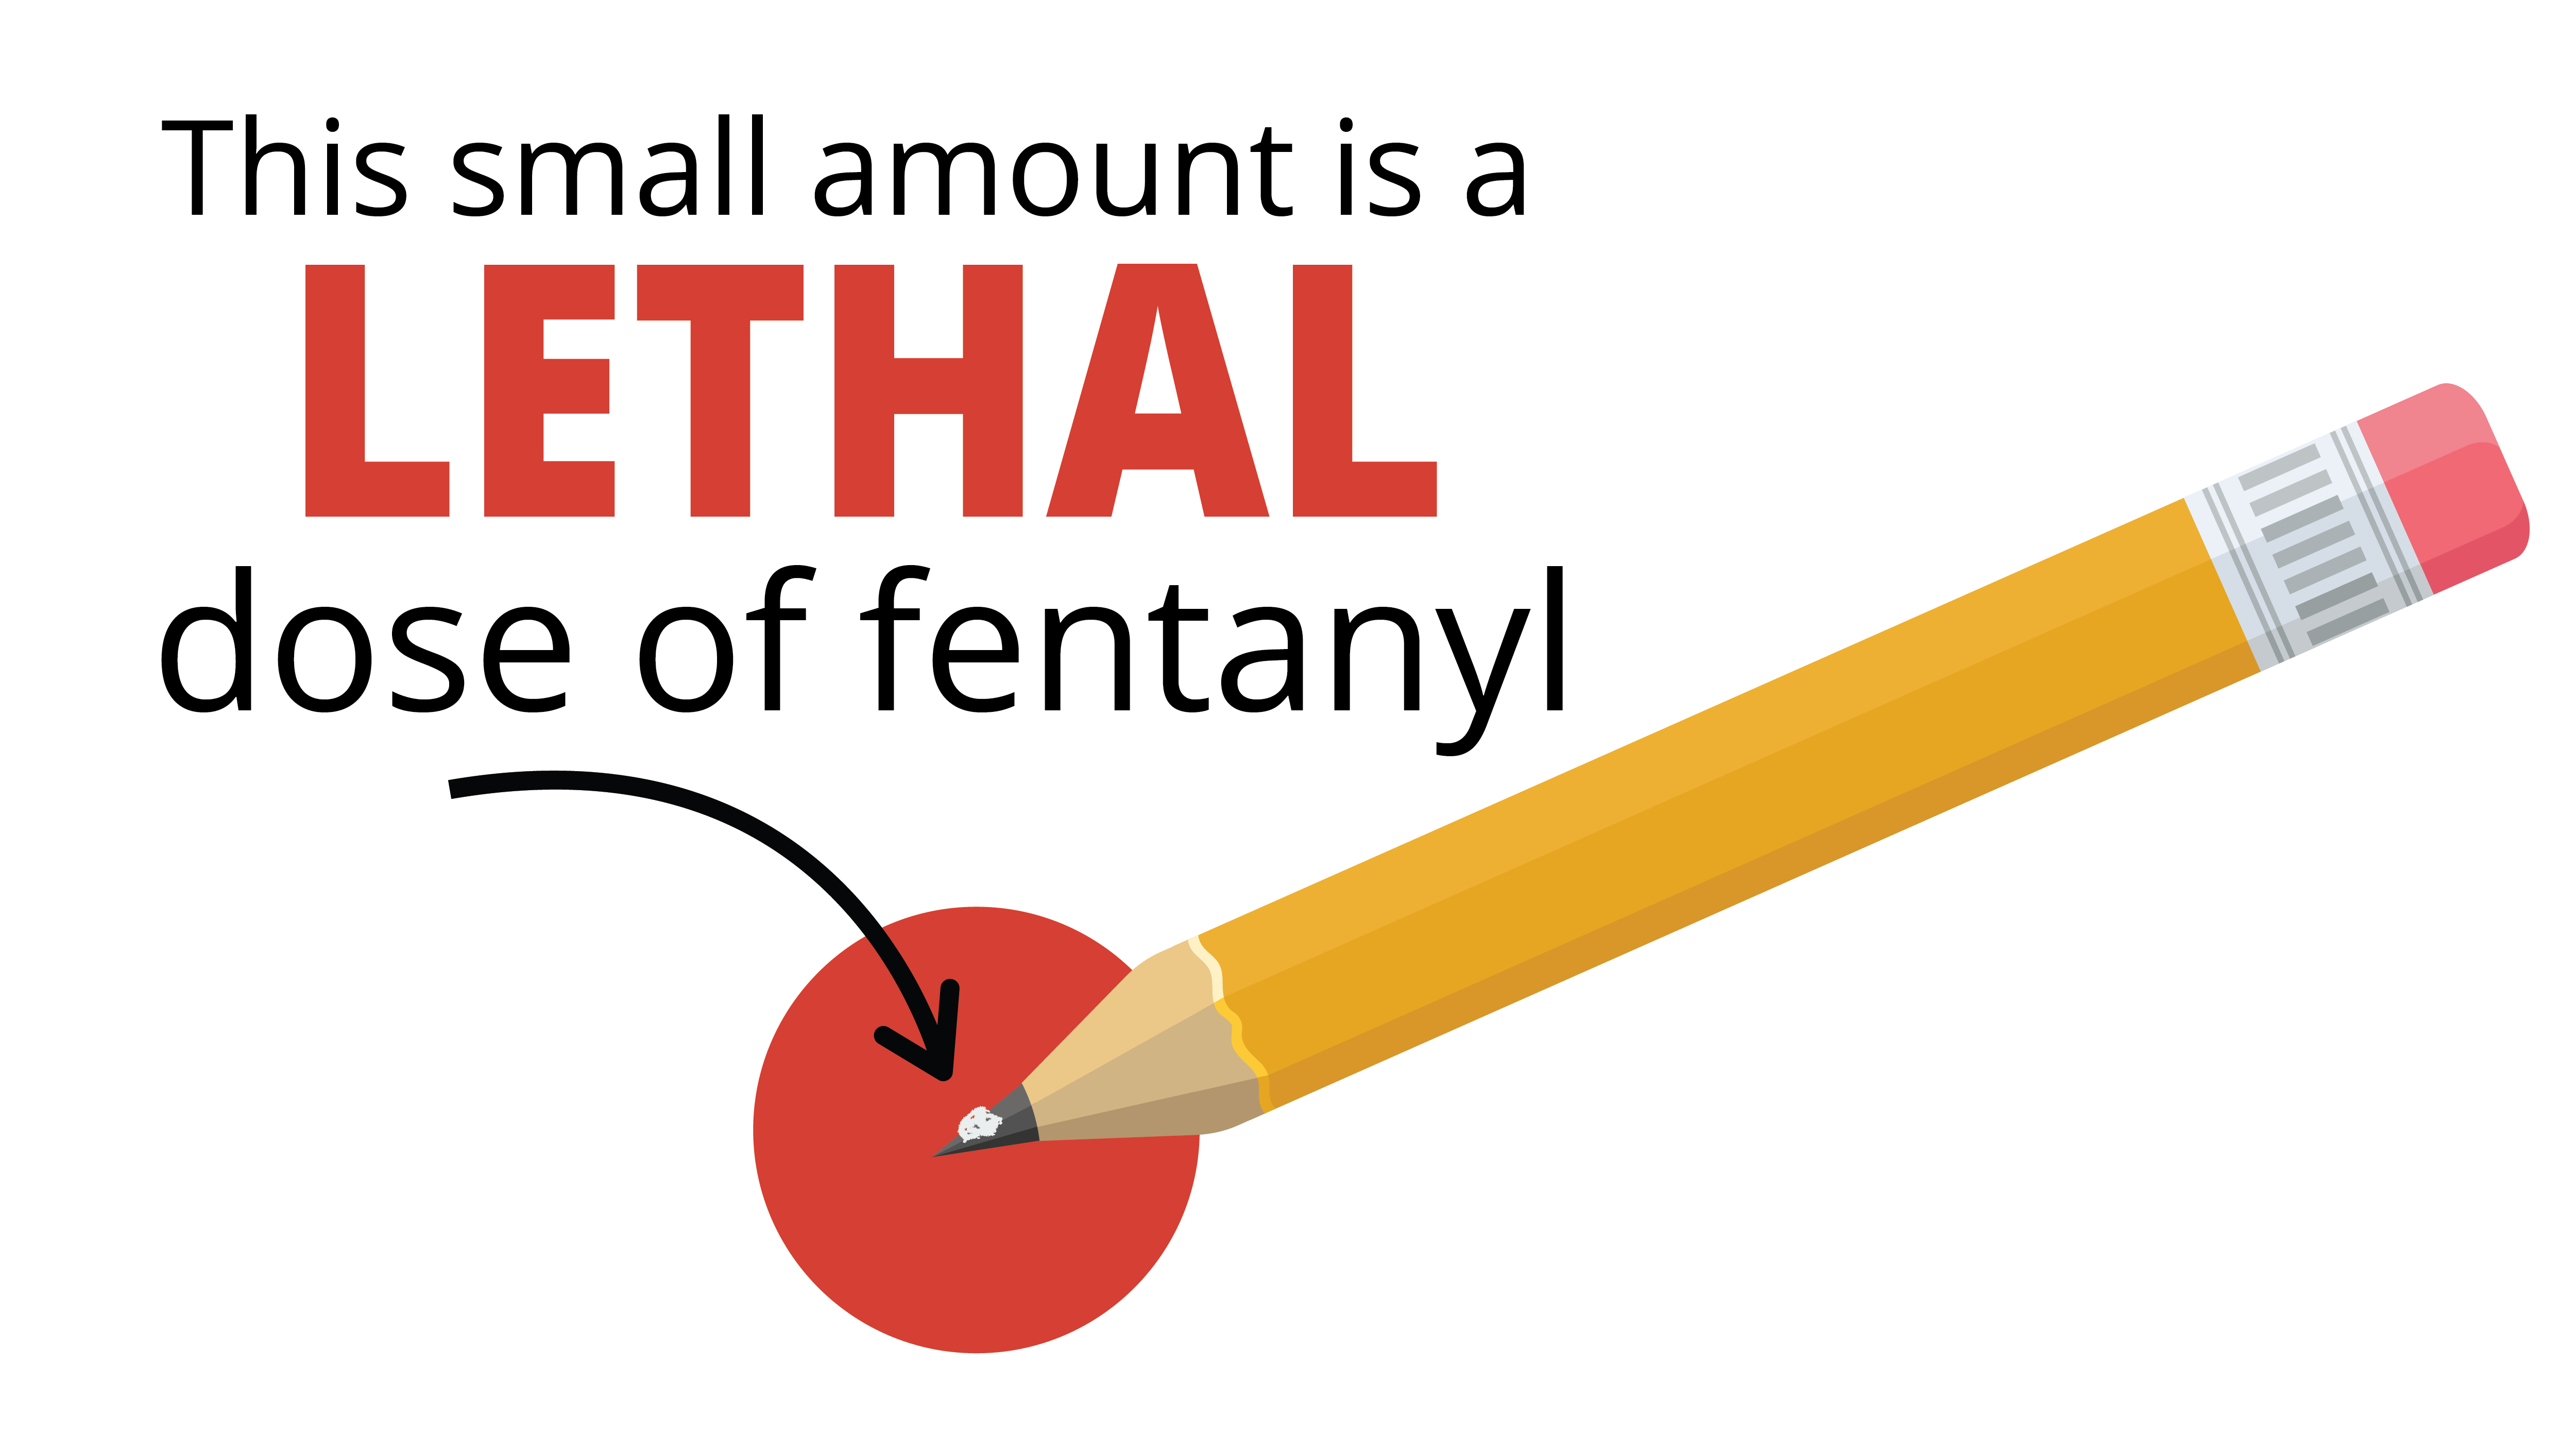 this small amount is a lethal dose of fentanyl (picture of a pencil tip)